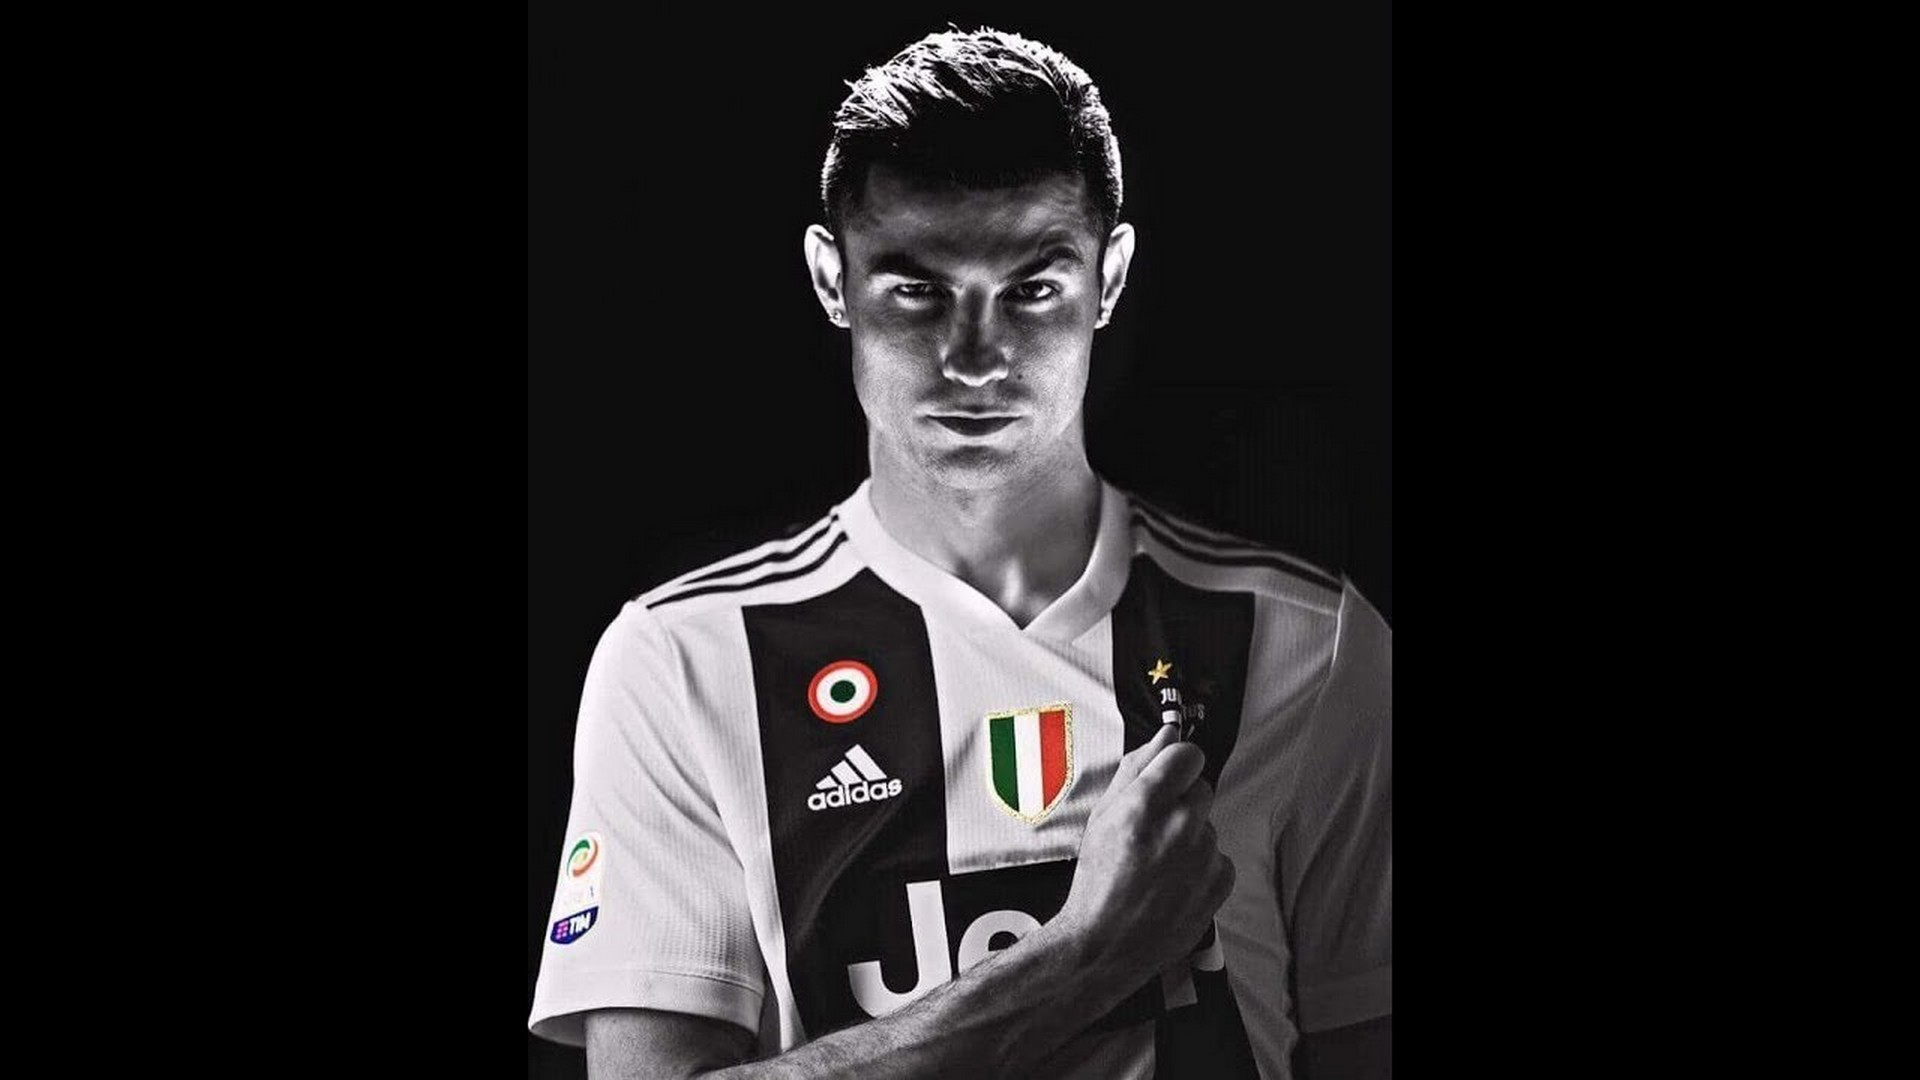 HD Wallpaper Cristiano Ronaldo Juventus With Resolution 1920X1080 pixel. You can make this wallpaper for your Desktop Computer Backgrounds, Mac Wallpapers, Android Lock screen or iPhone Screensavers